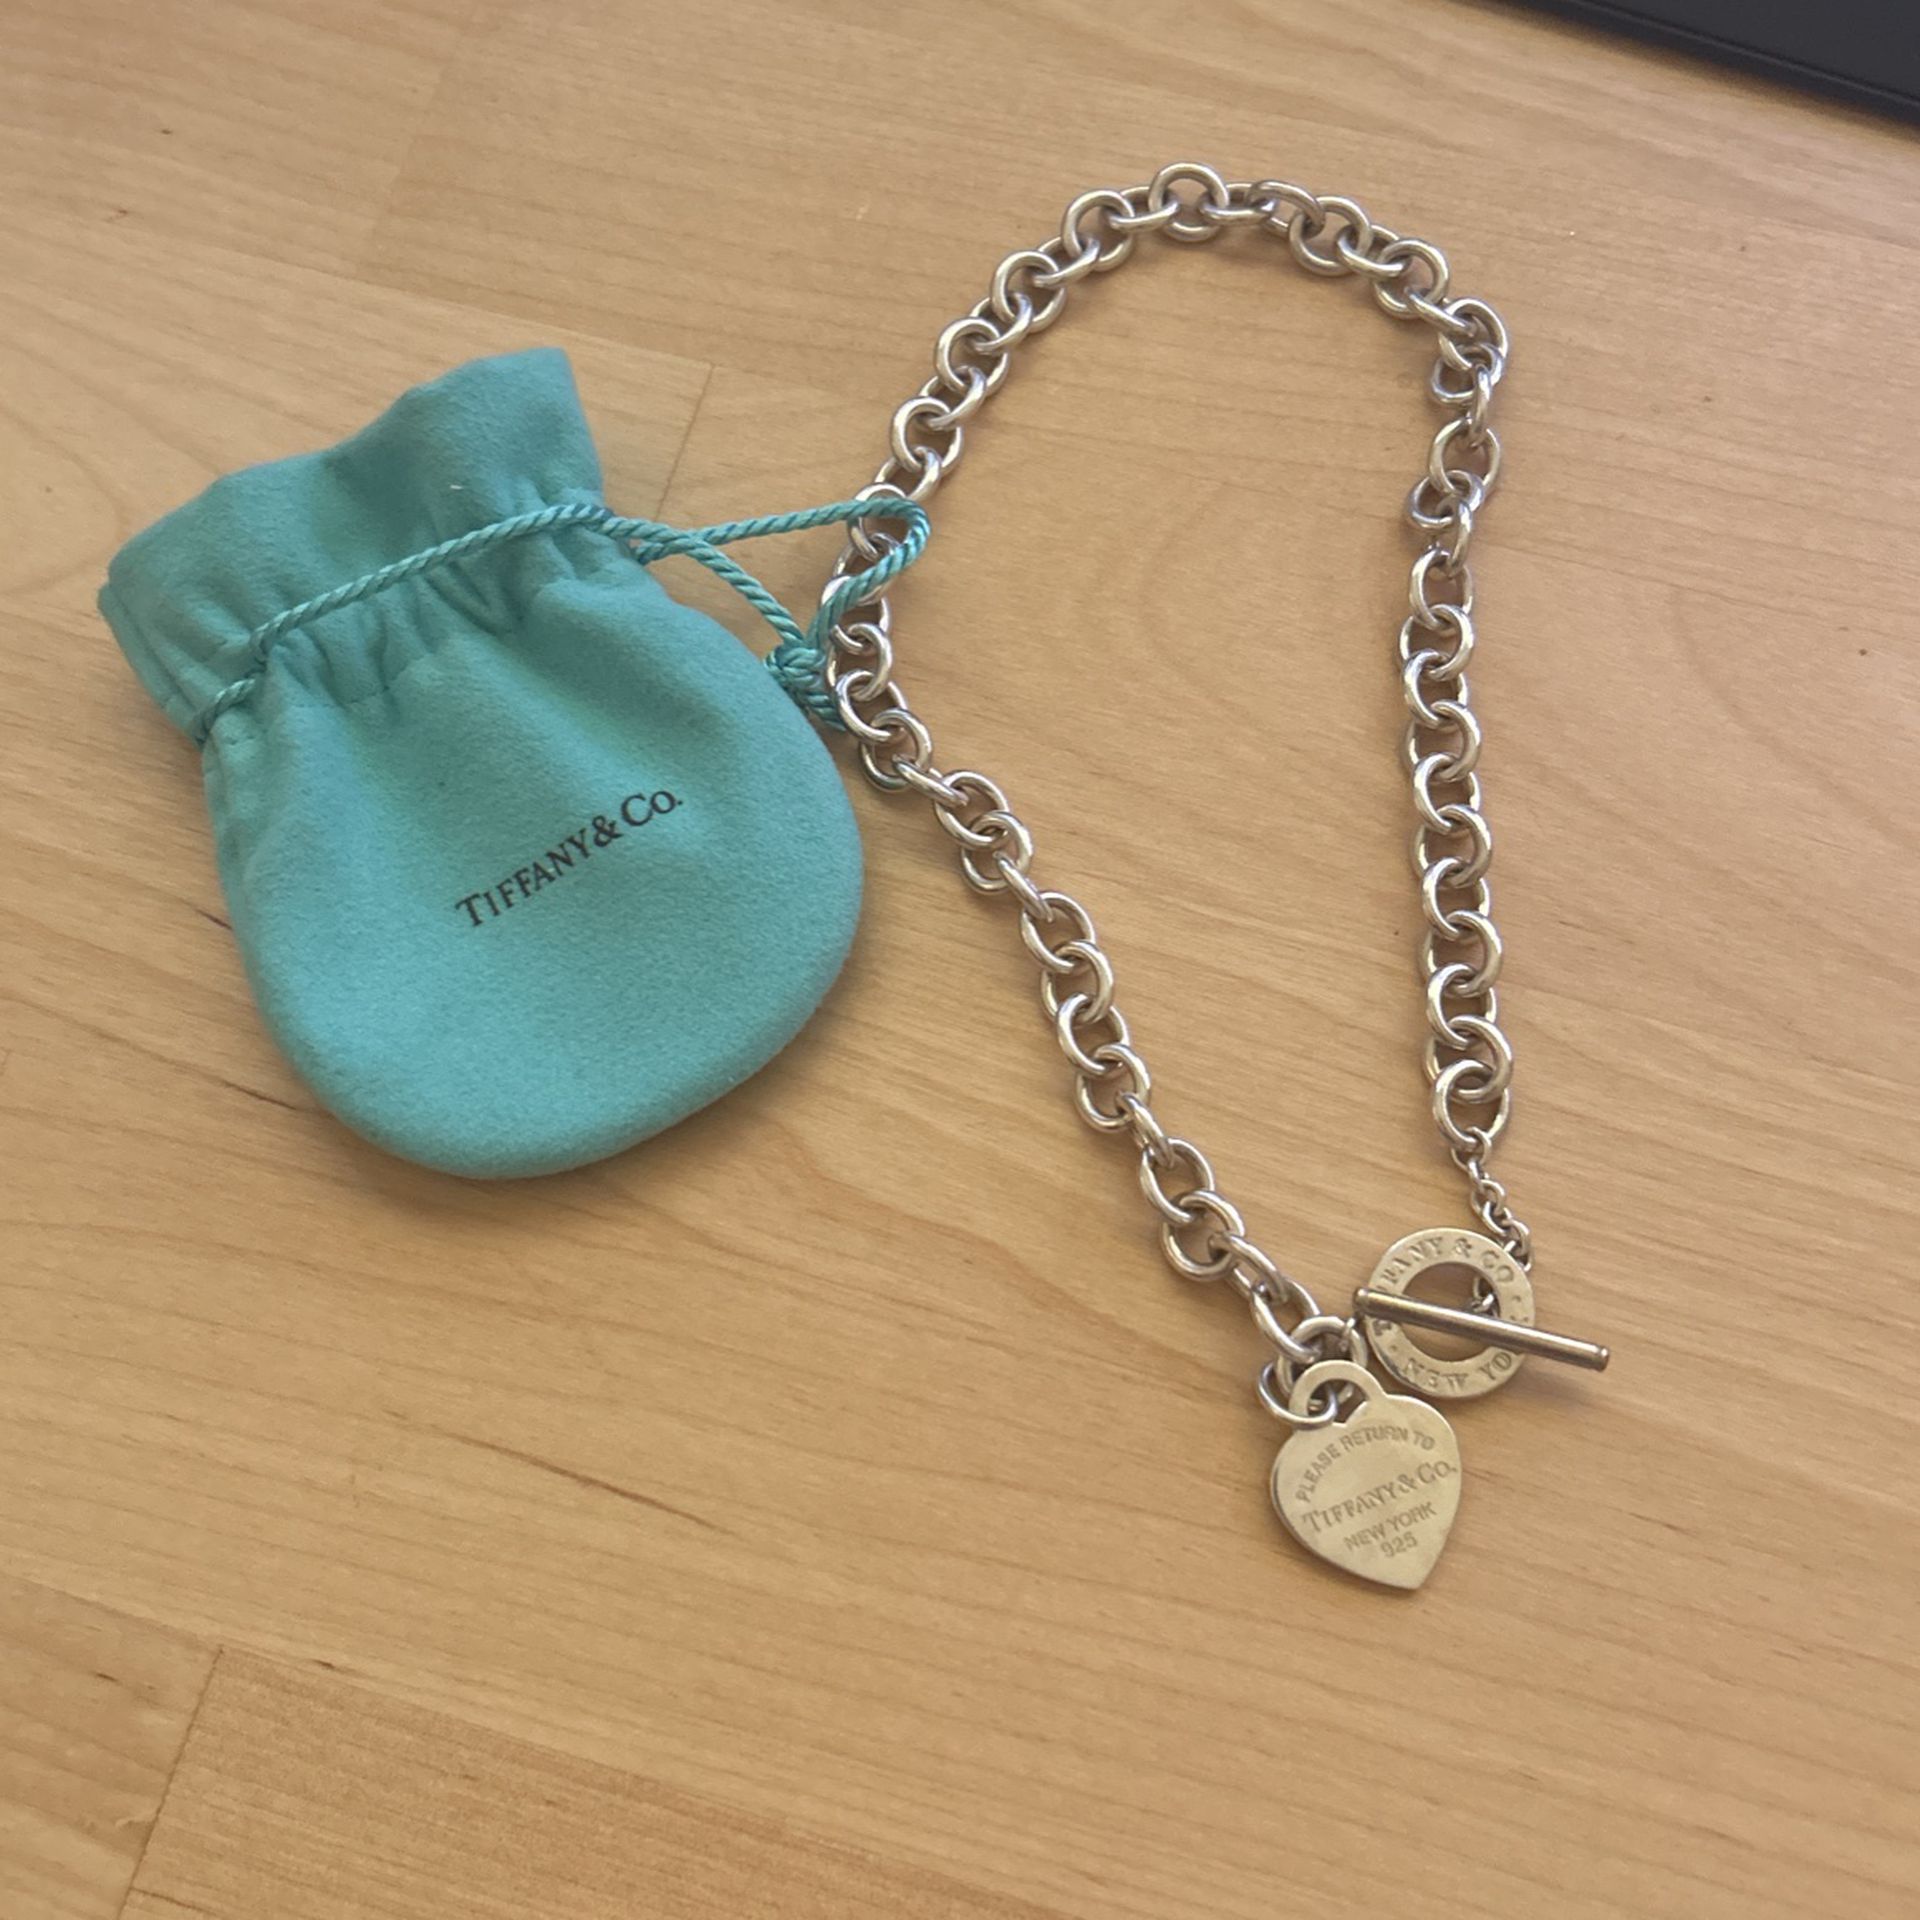 Tiffany and Co Necklace. Need gone ASAP